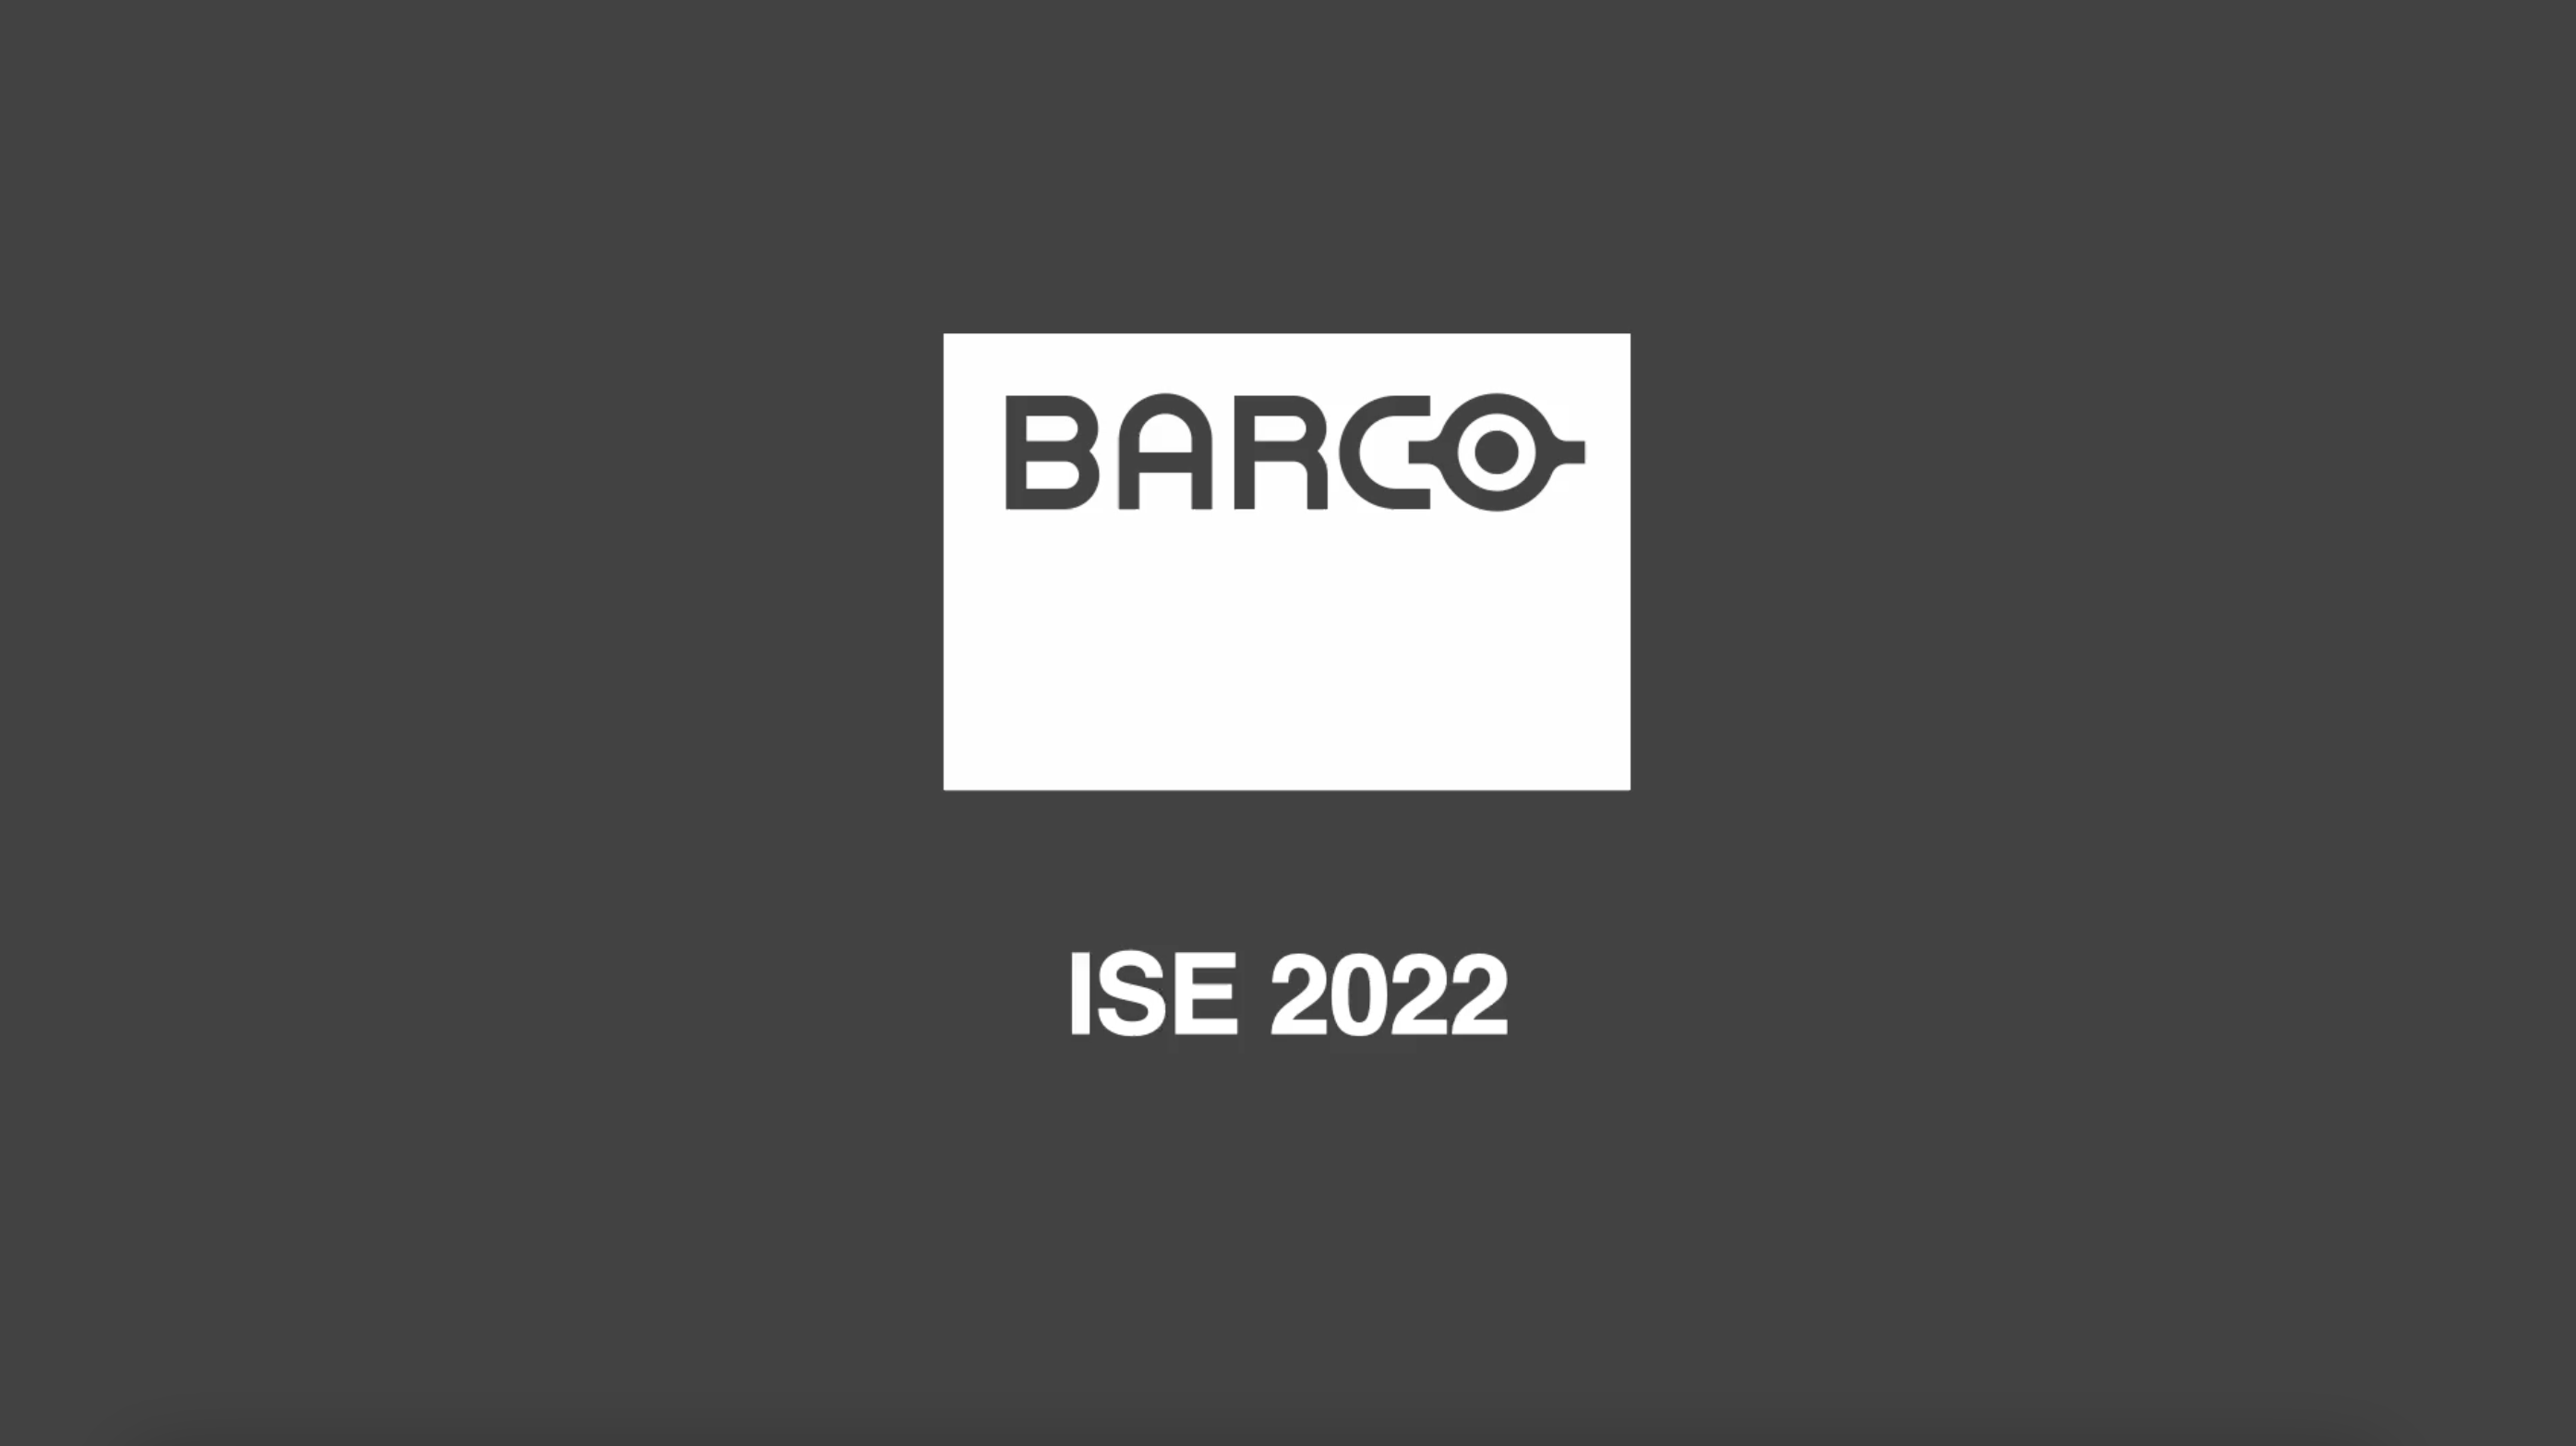 ISE 2022: Barco ISE 2022 Booth Tour Focuses on the Future of Customer Experiences and Solutions